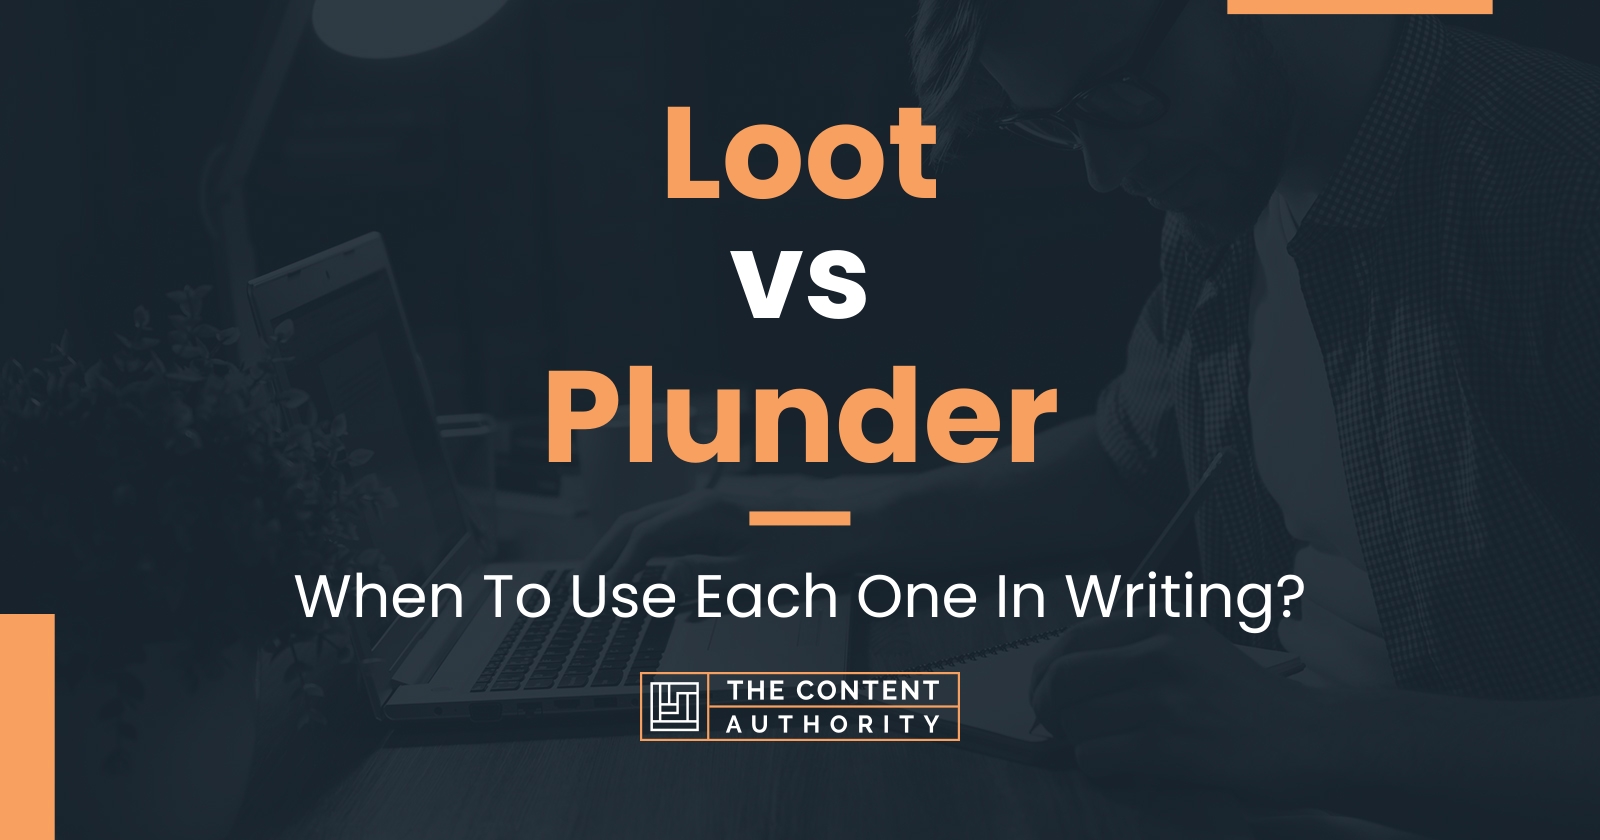 Loot vs Plunder: When To Use Each One In Writing?